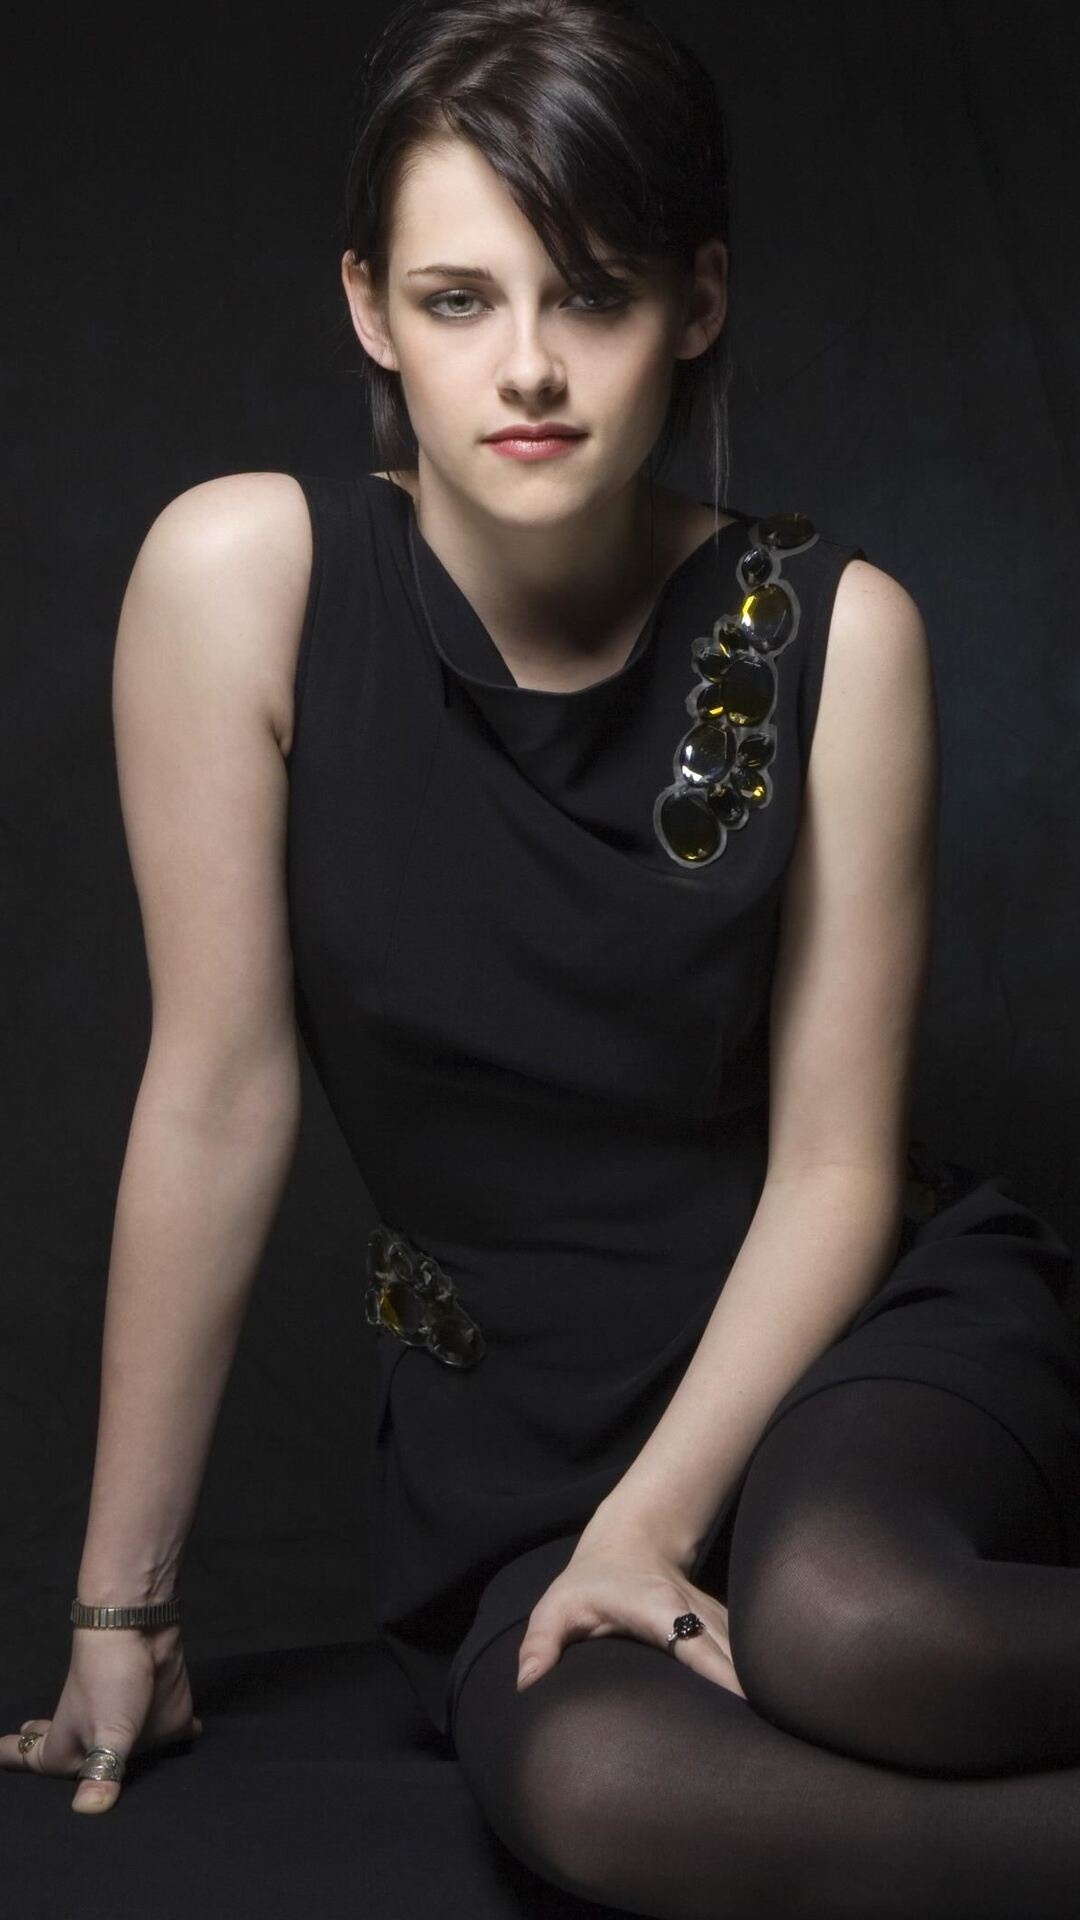 Kristen Stewart: Topped Forbes' list of “Hollywood's Best Actors for the Buck” in 2011. 1080x1920 Full HD Wallpaper.